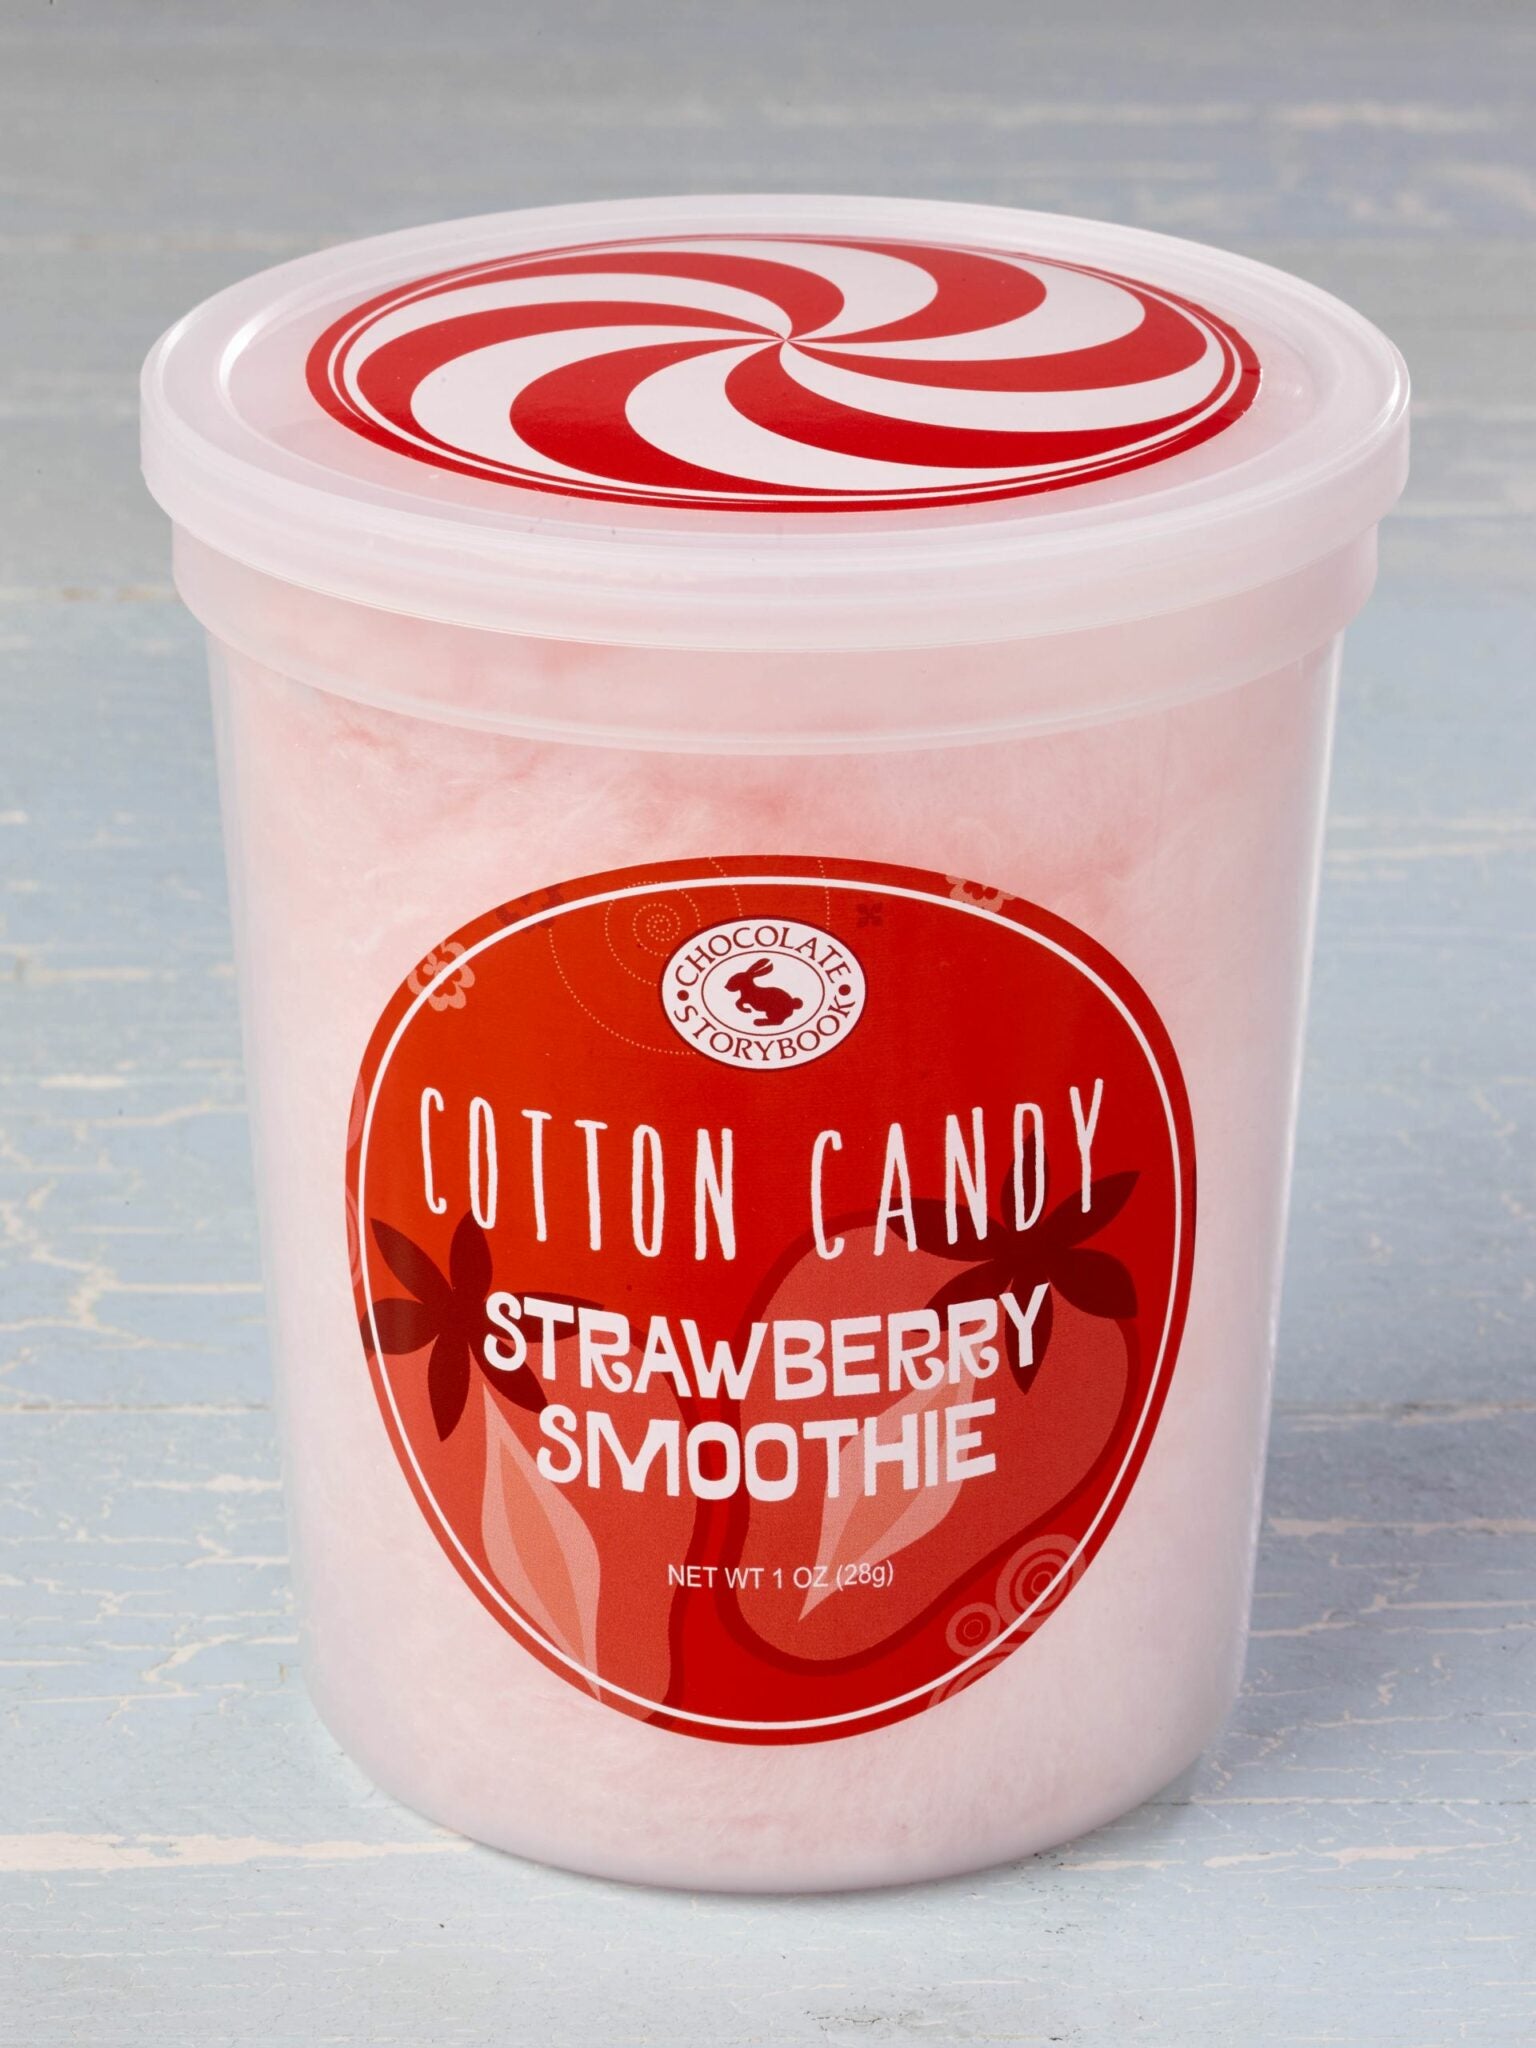 Strawberry Smoothie - Cotton Candy